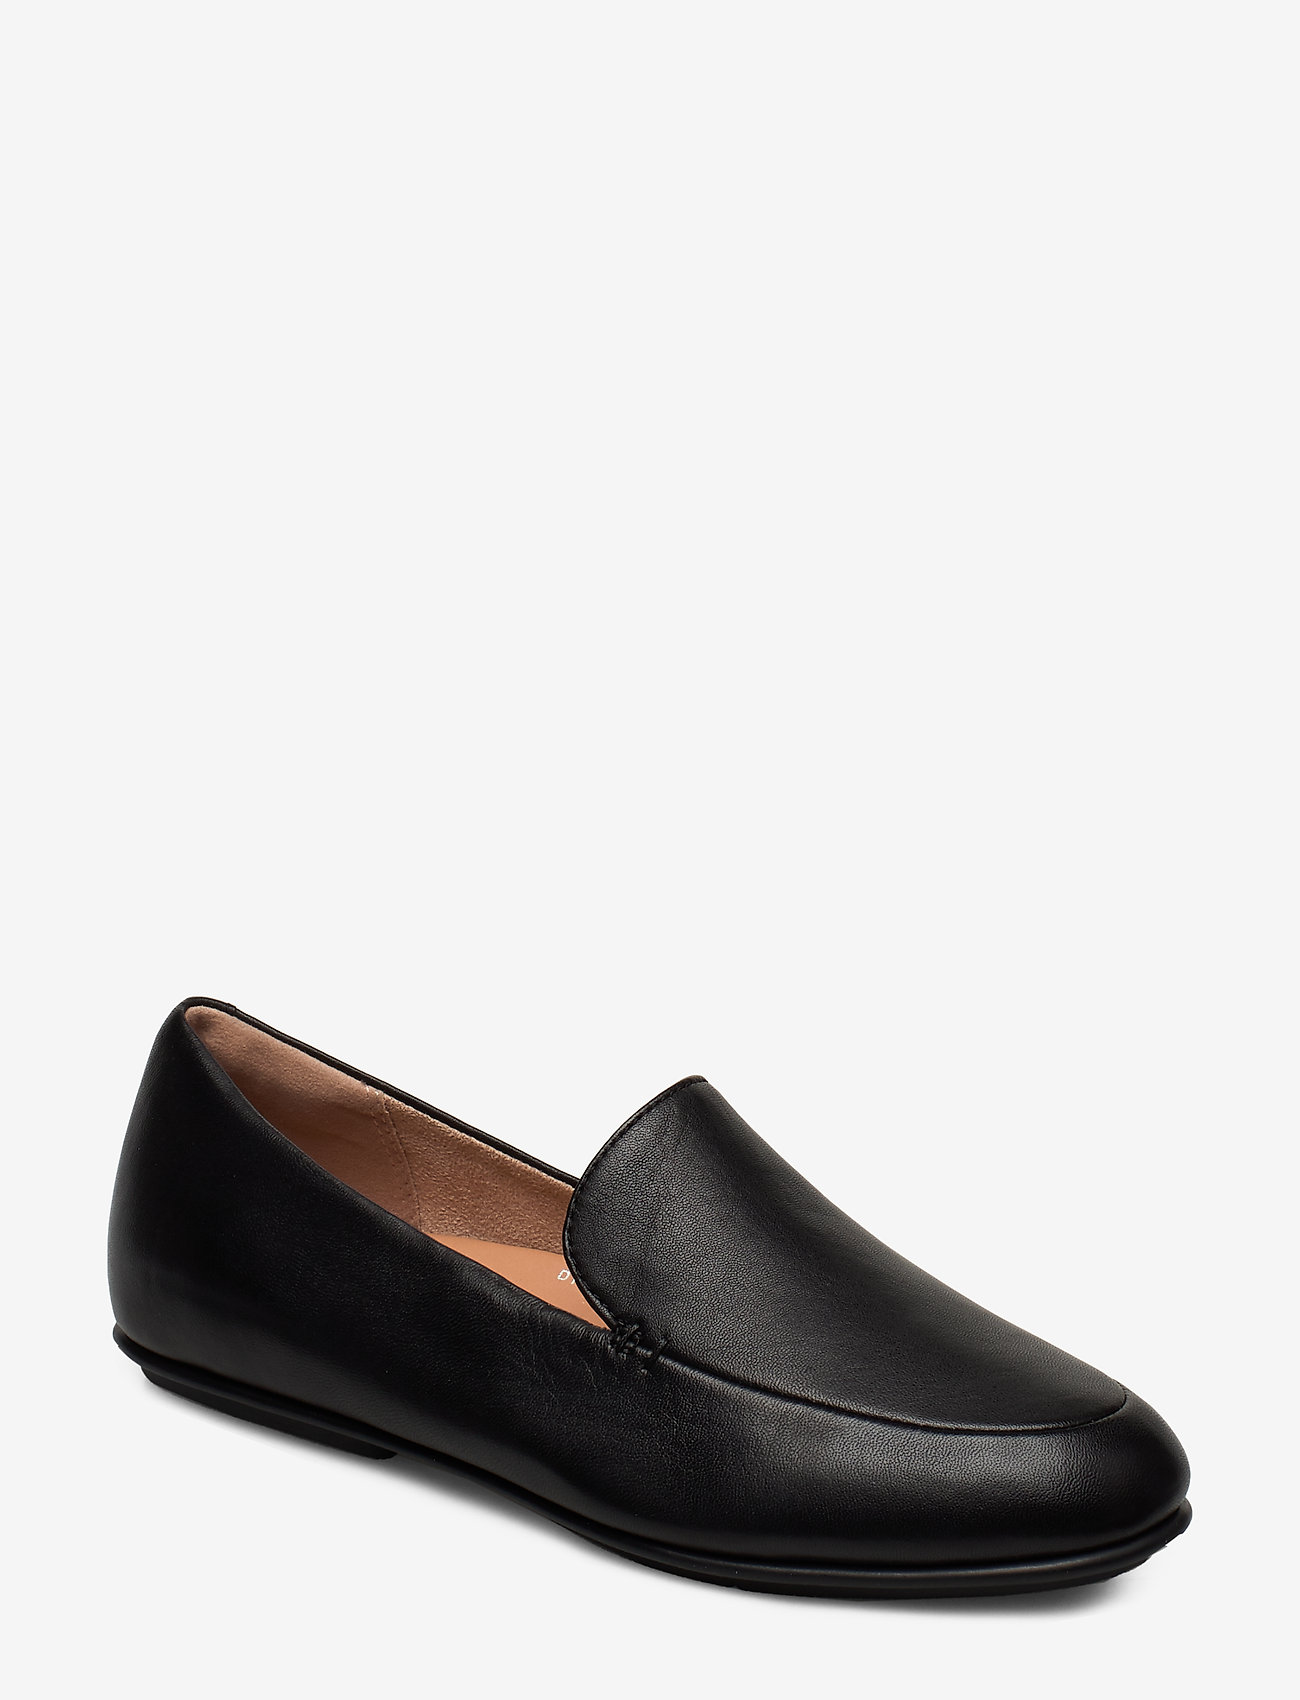 loafers all black